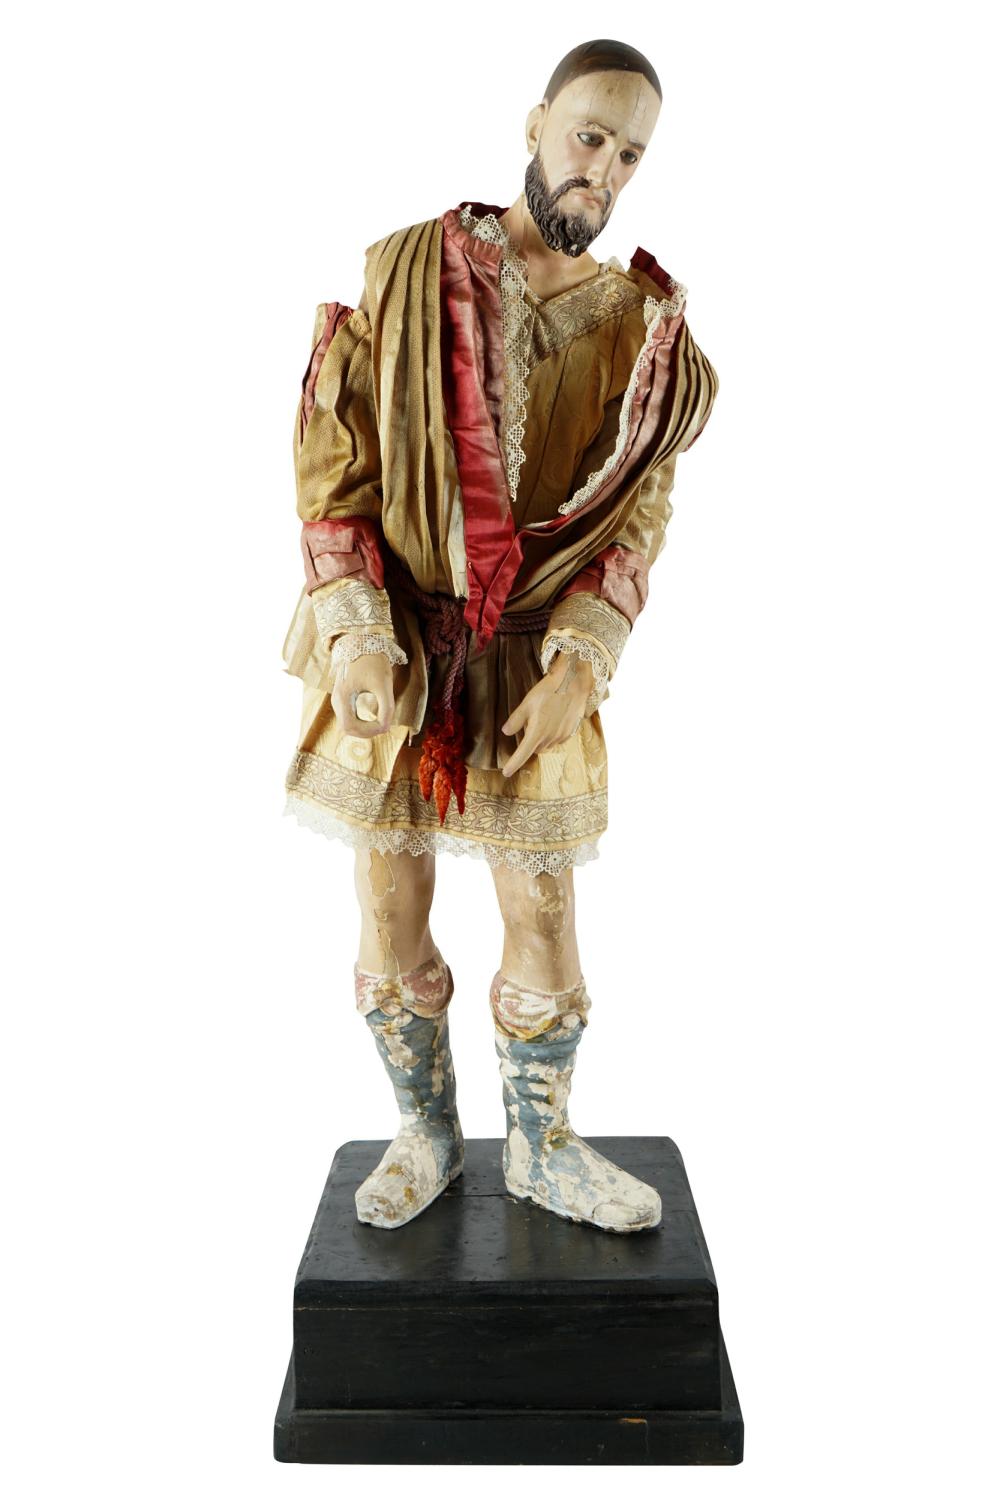 COLONIAL CARVED & POLYCHROME FIGURE